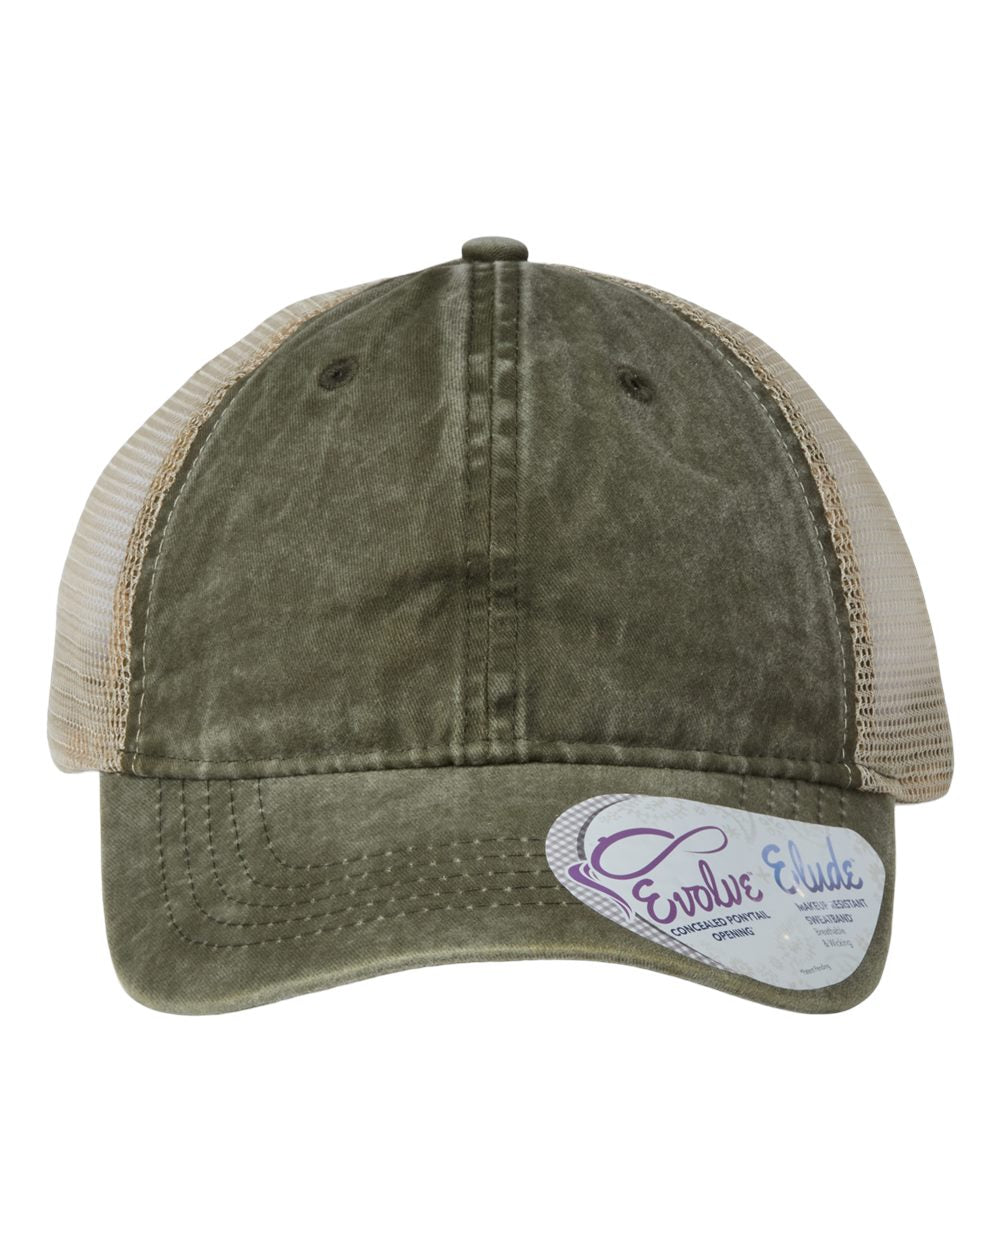 A women's washed mesh-back cap in olive green with camouflage pattern on the front panel.